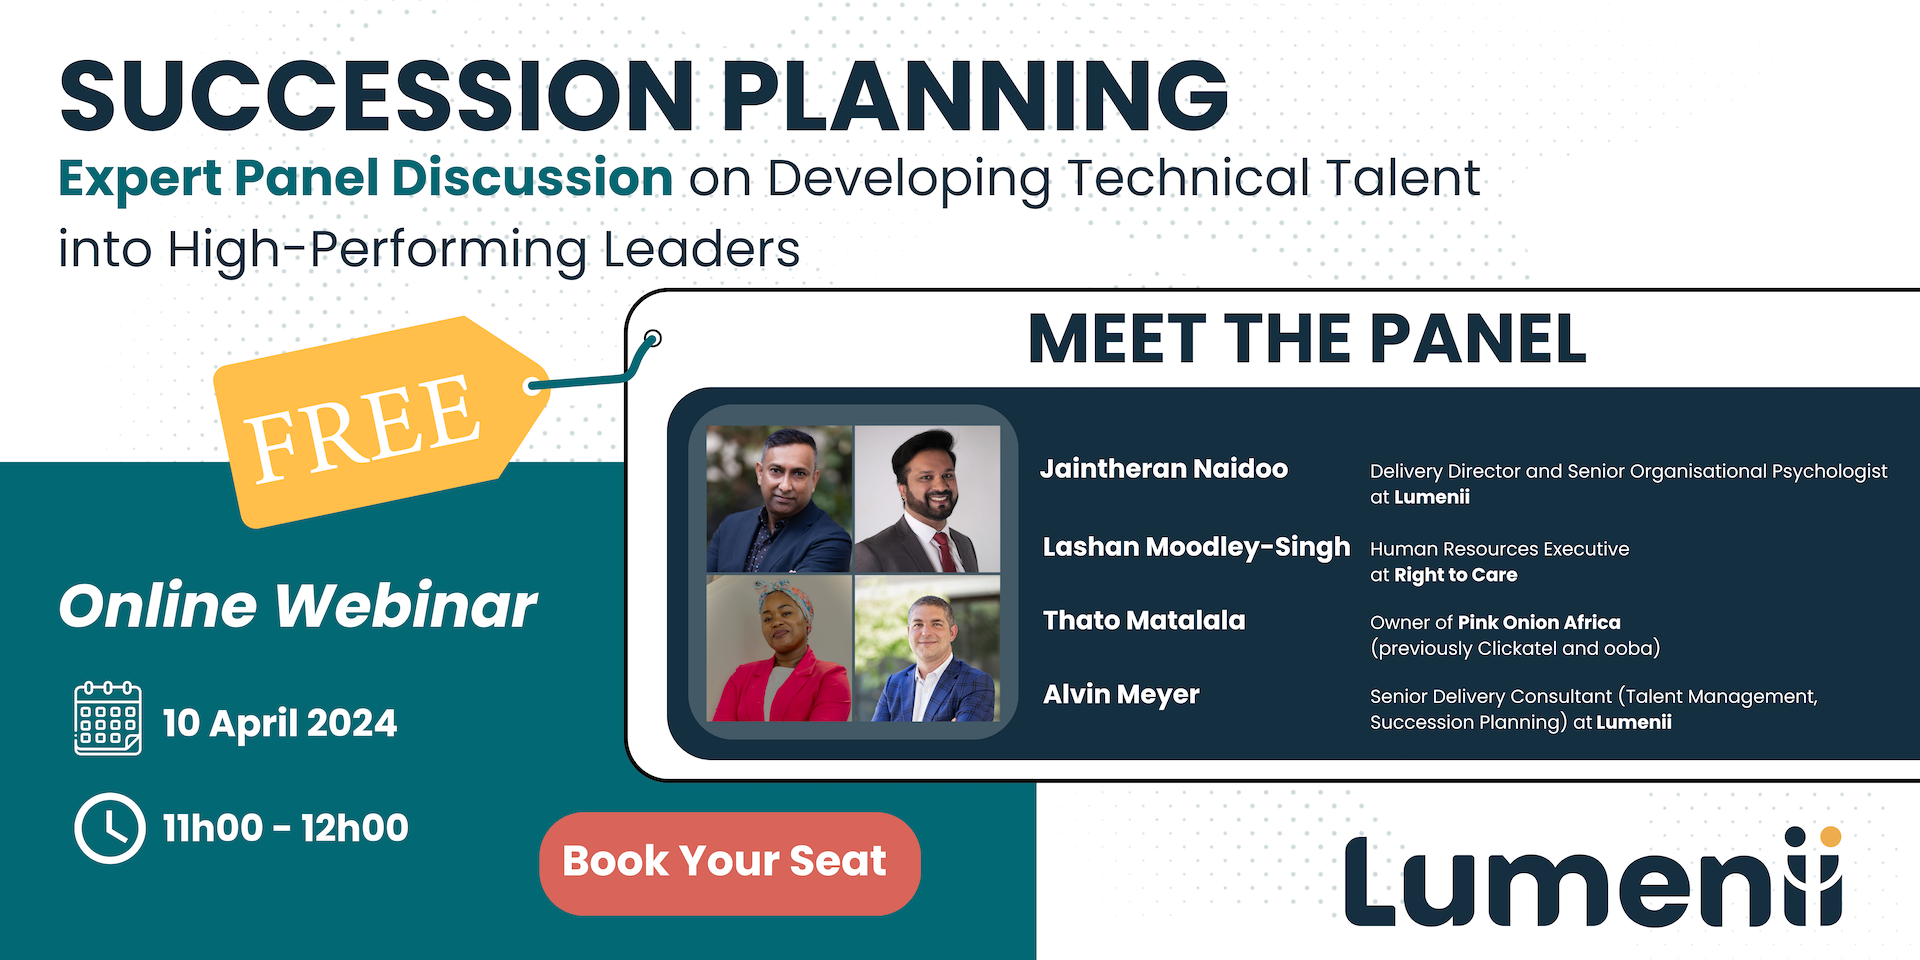 HR webinar speakers about developing technical talent into leadership roles with succession planning